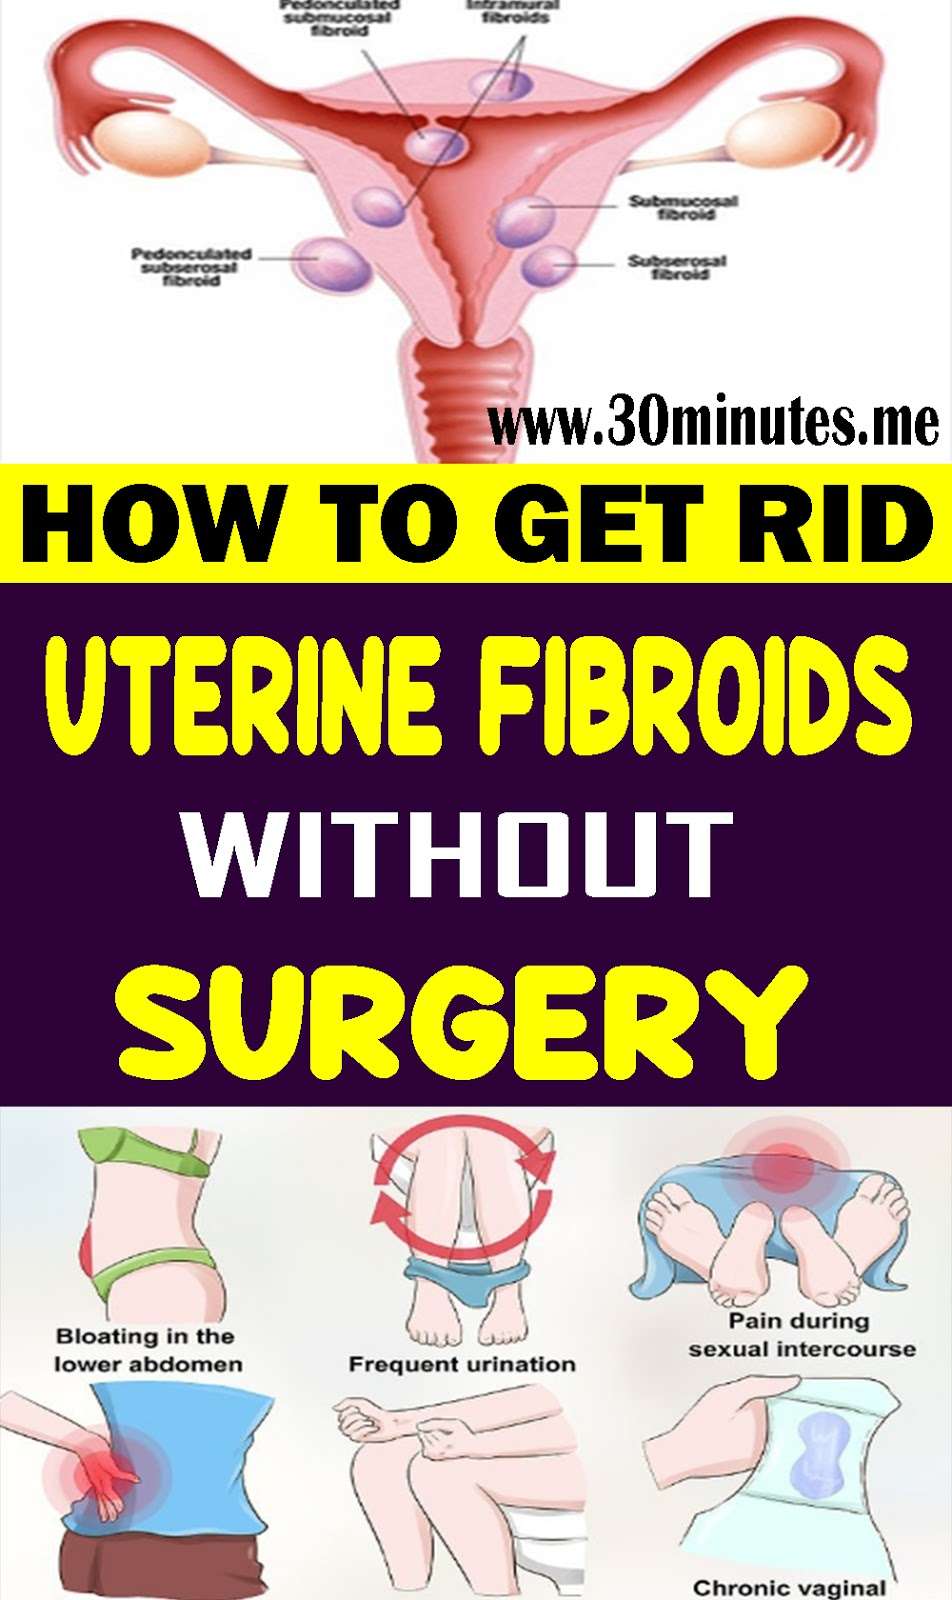 How to Get Rid of Uterine Fibroids without Surgery